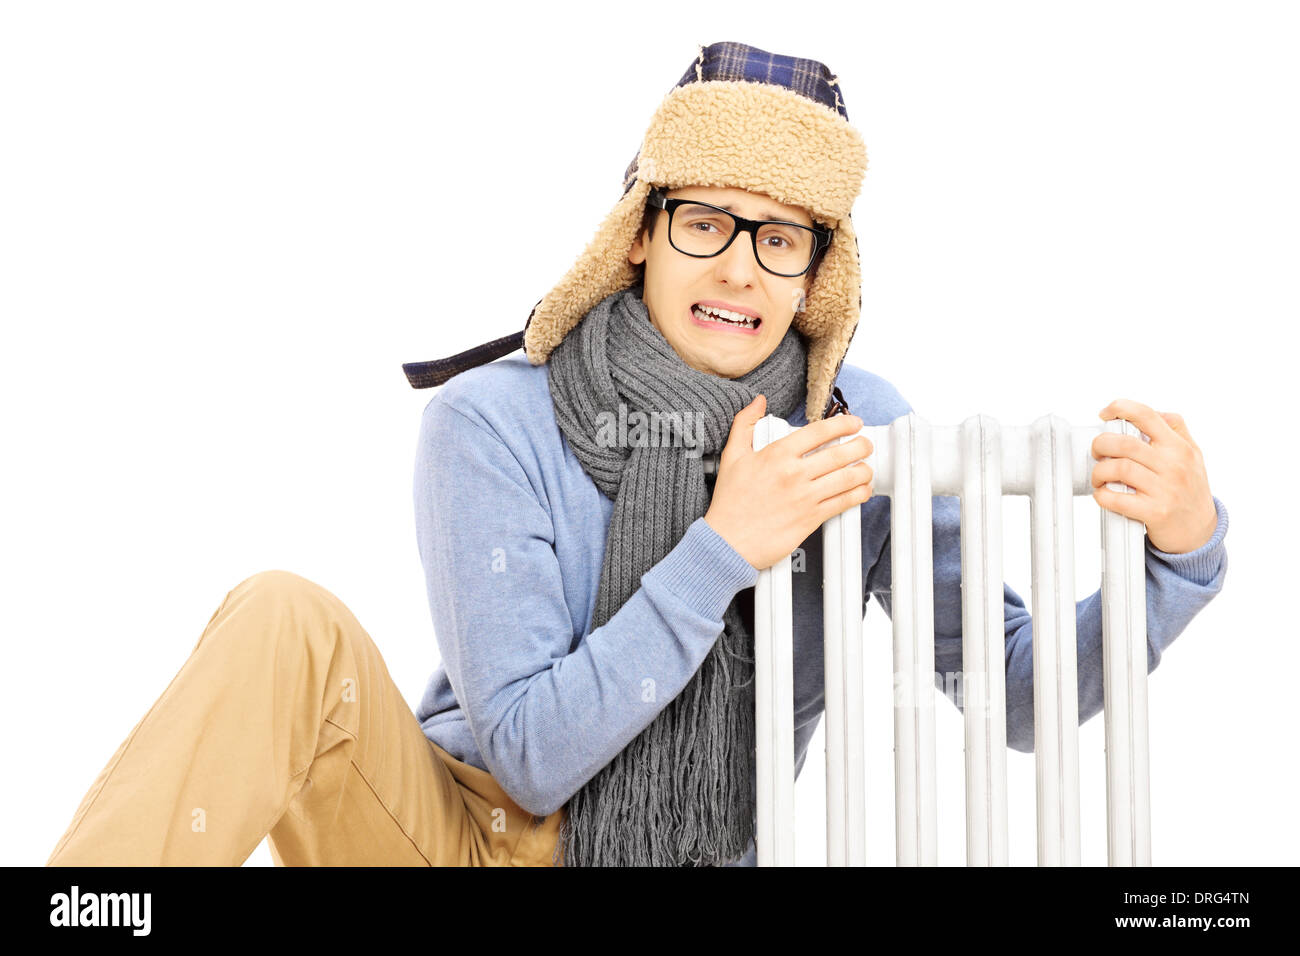 Chilled young man with winter hat sitting next to a radiator Stock Photo